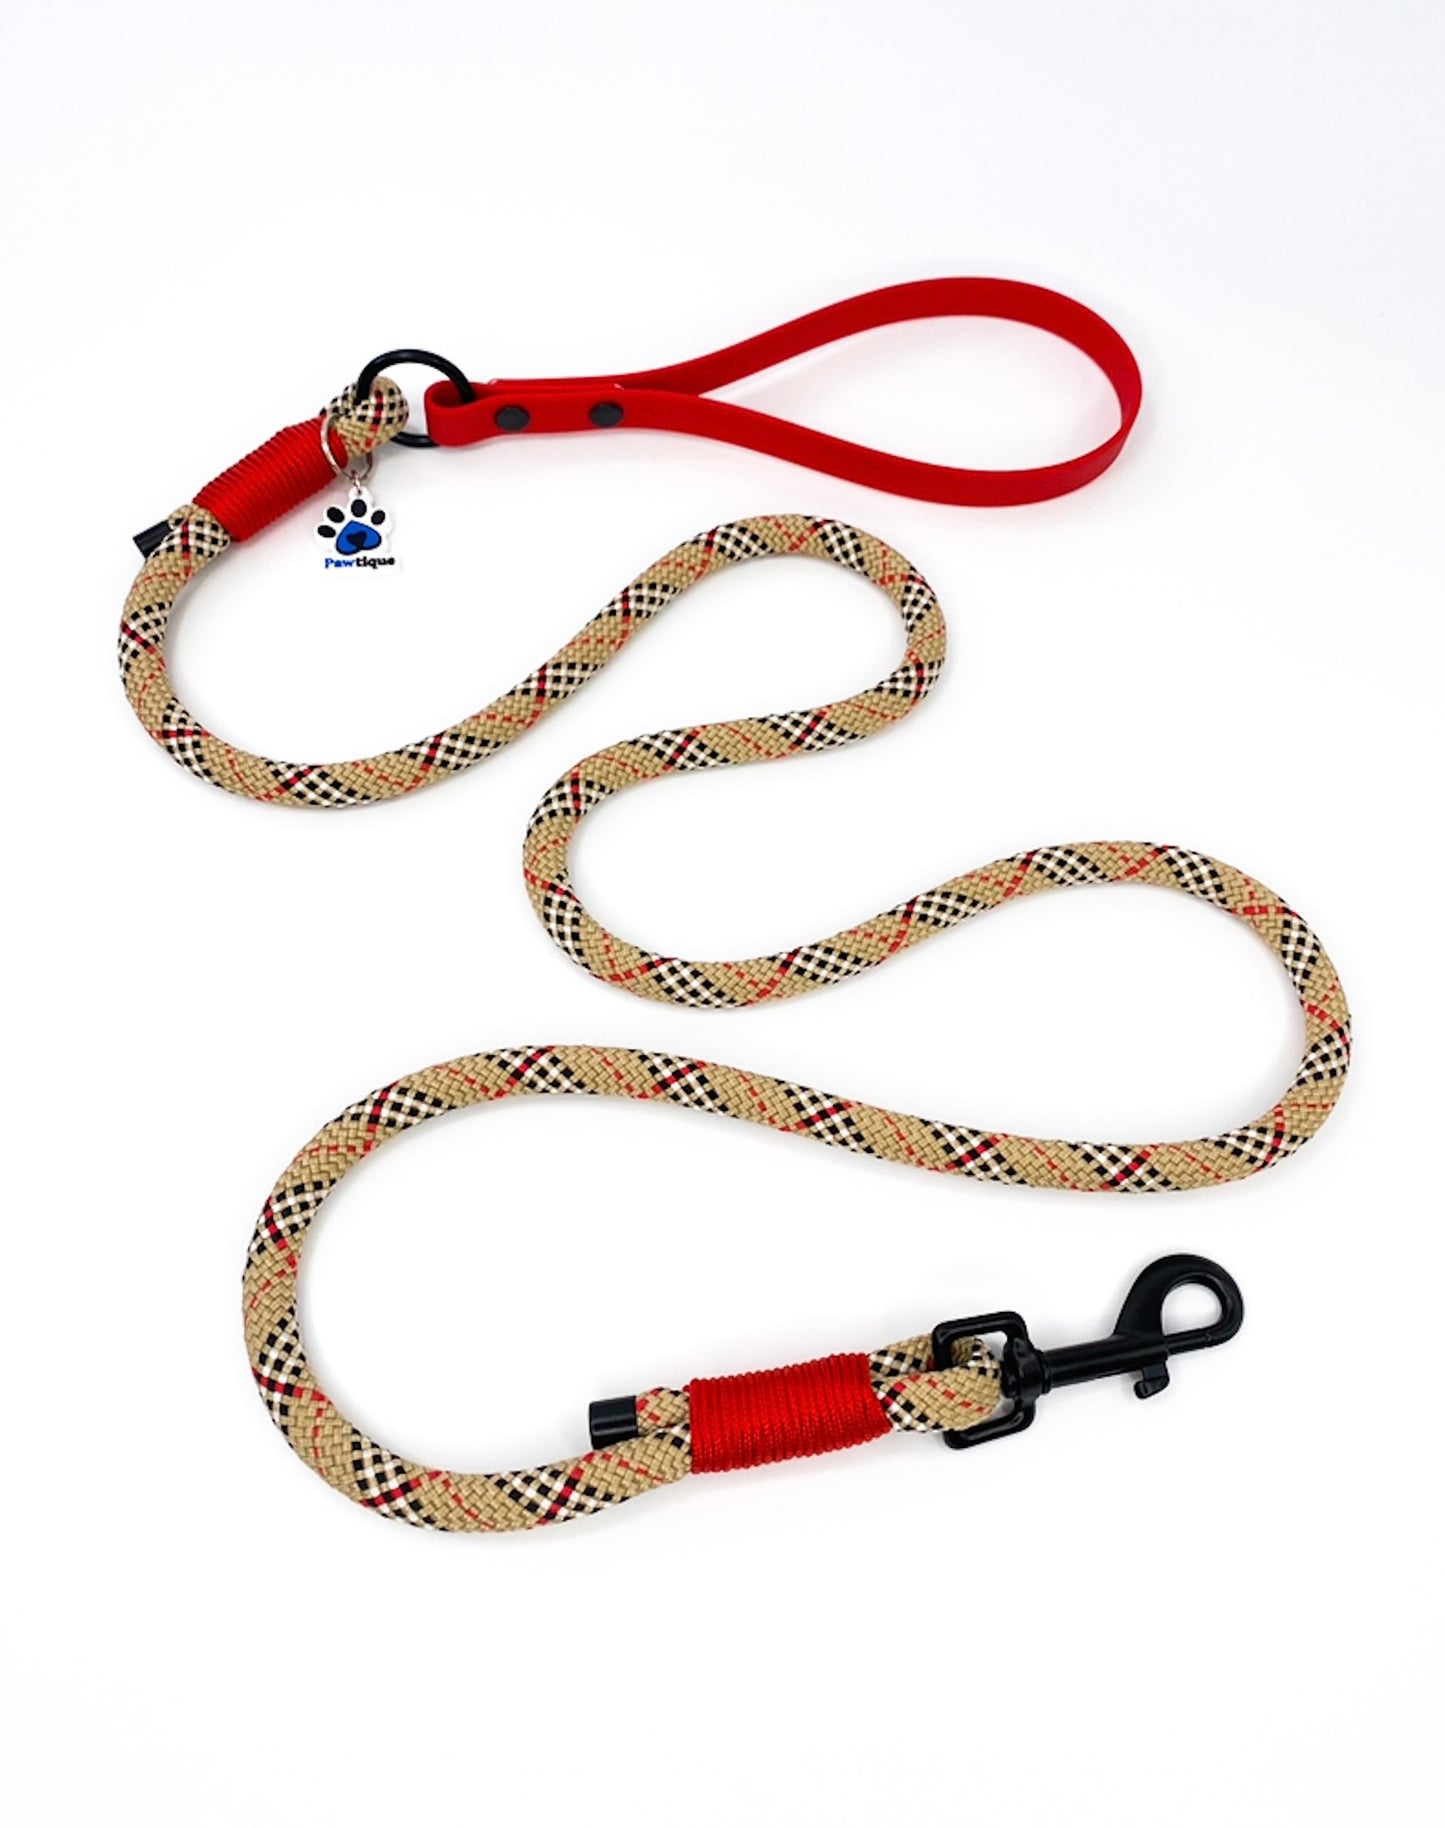 Rope Lead *Design your own*